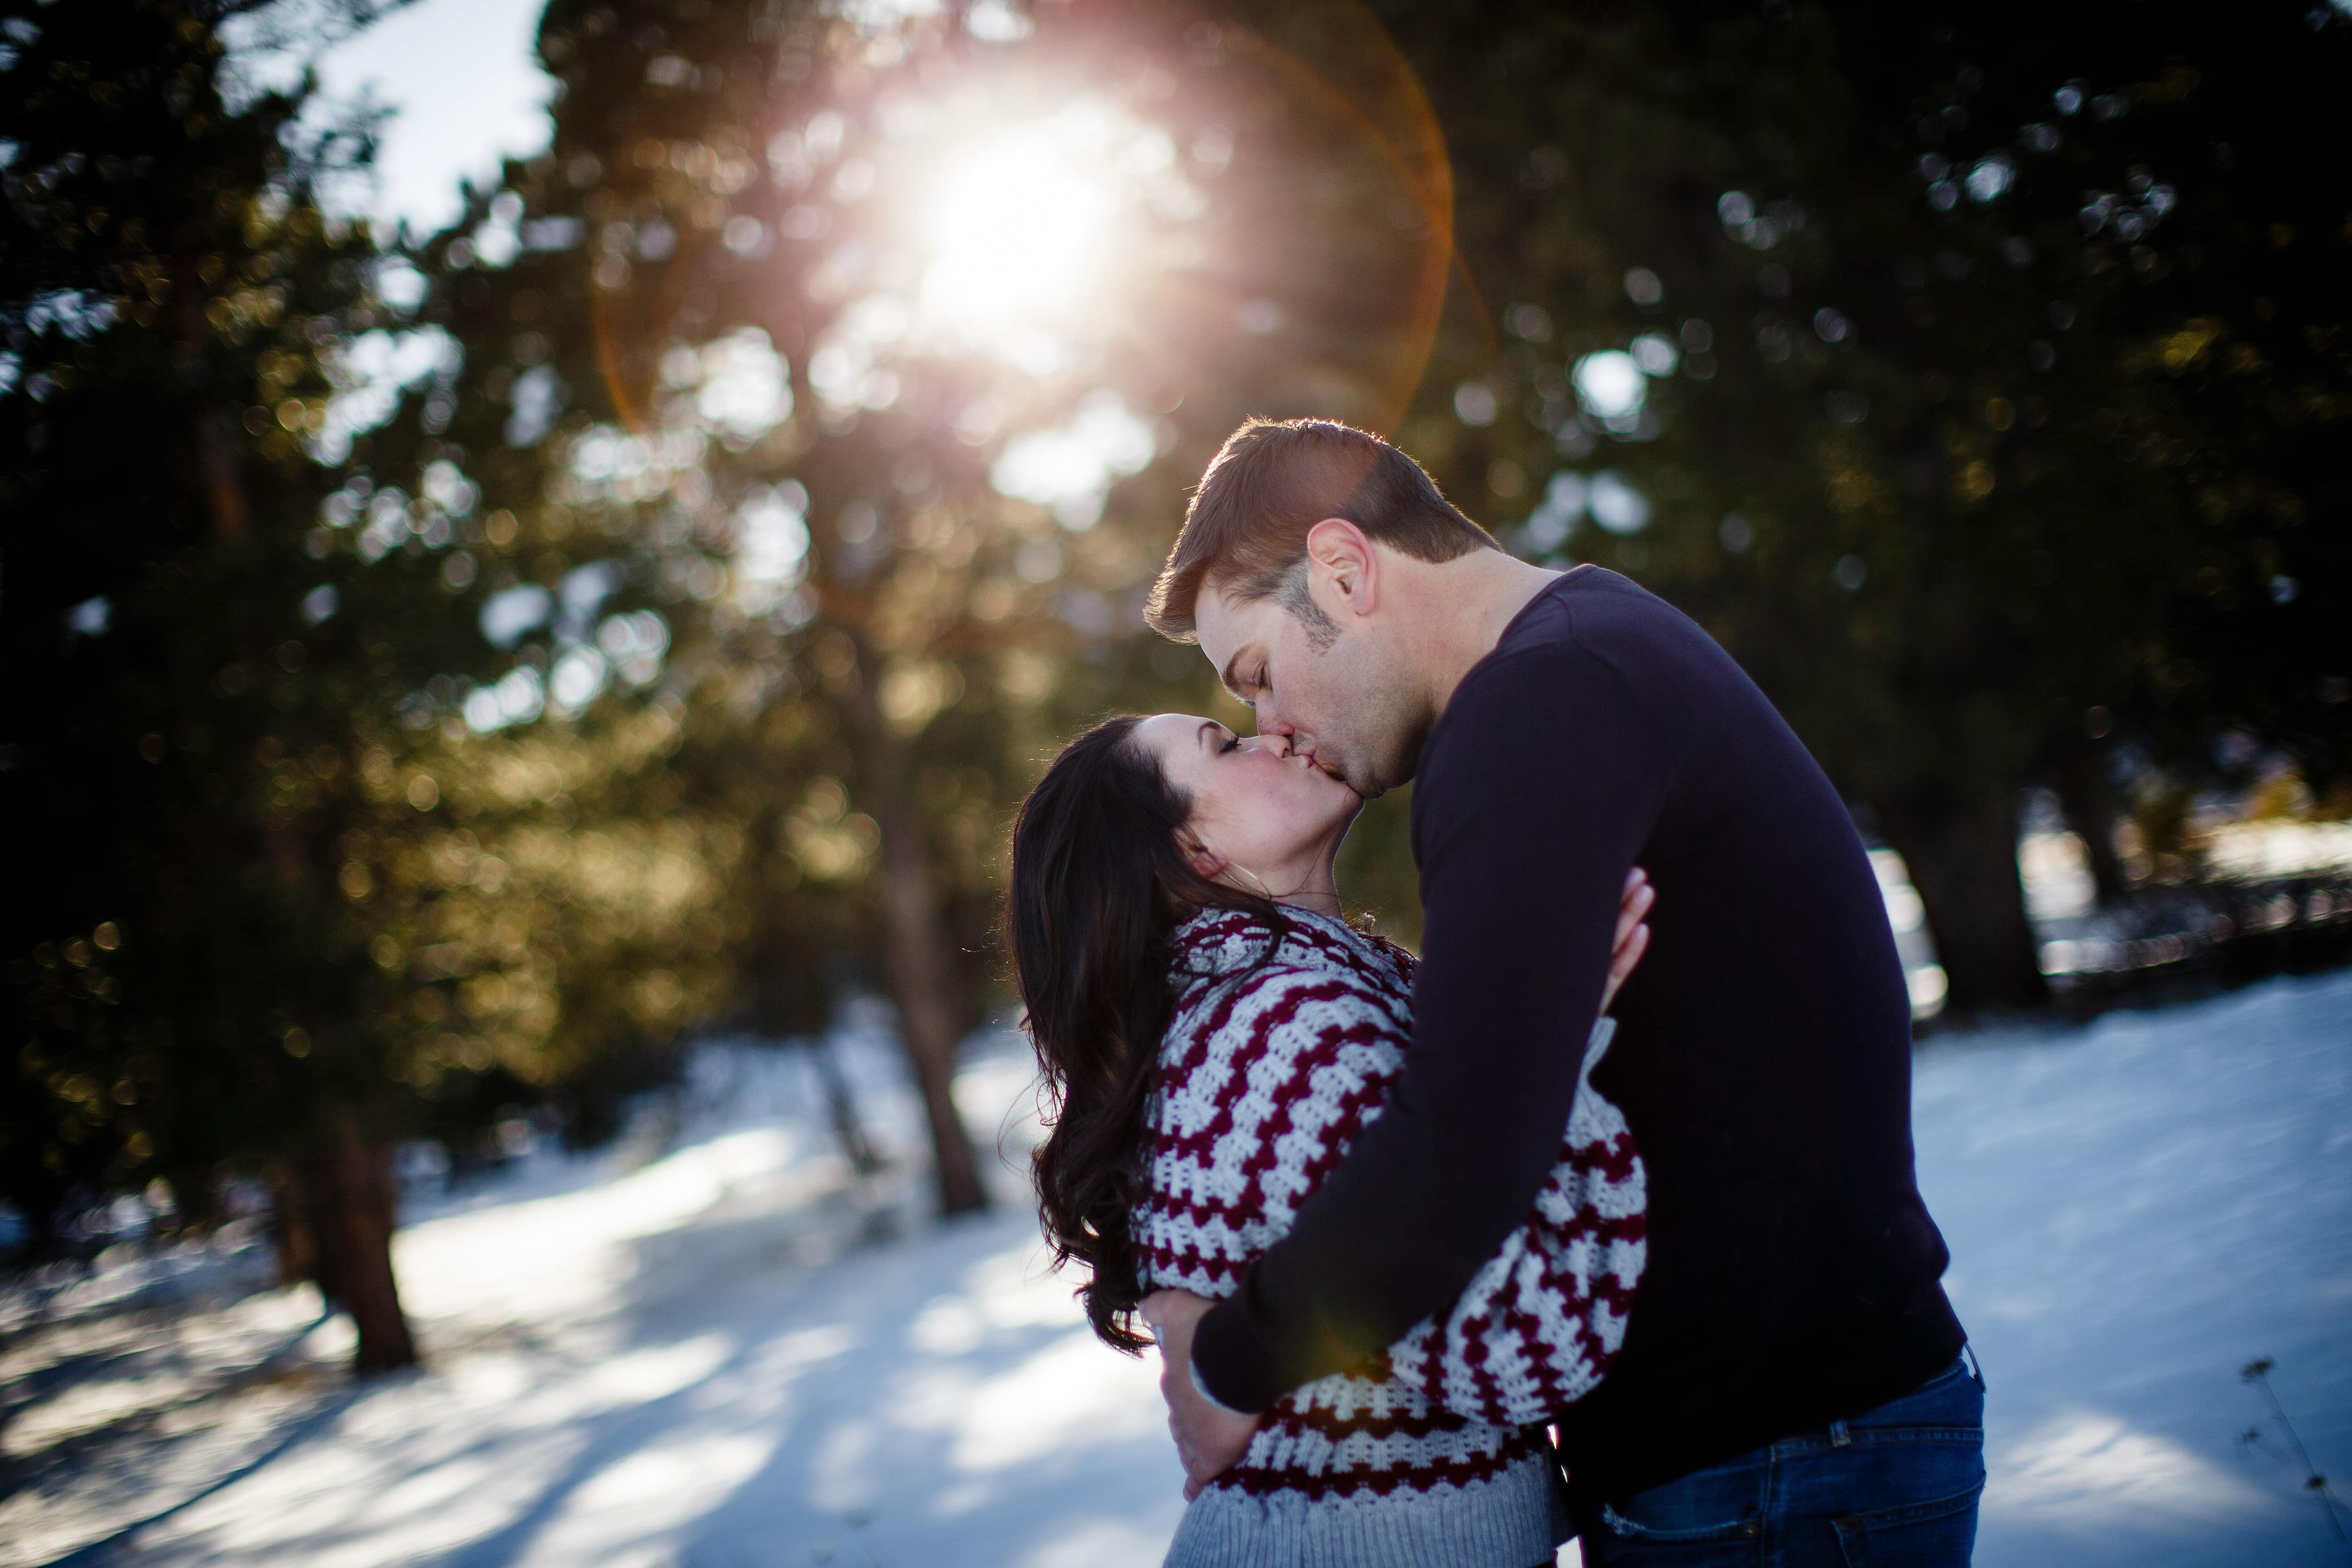 The sun flares through the trees as Jordan and Melissa share a kiss during their winter engagement session at Elk Meadow Park in Evergreen, Colorado